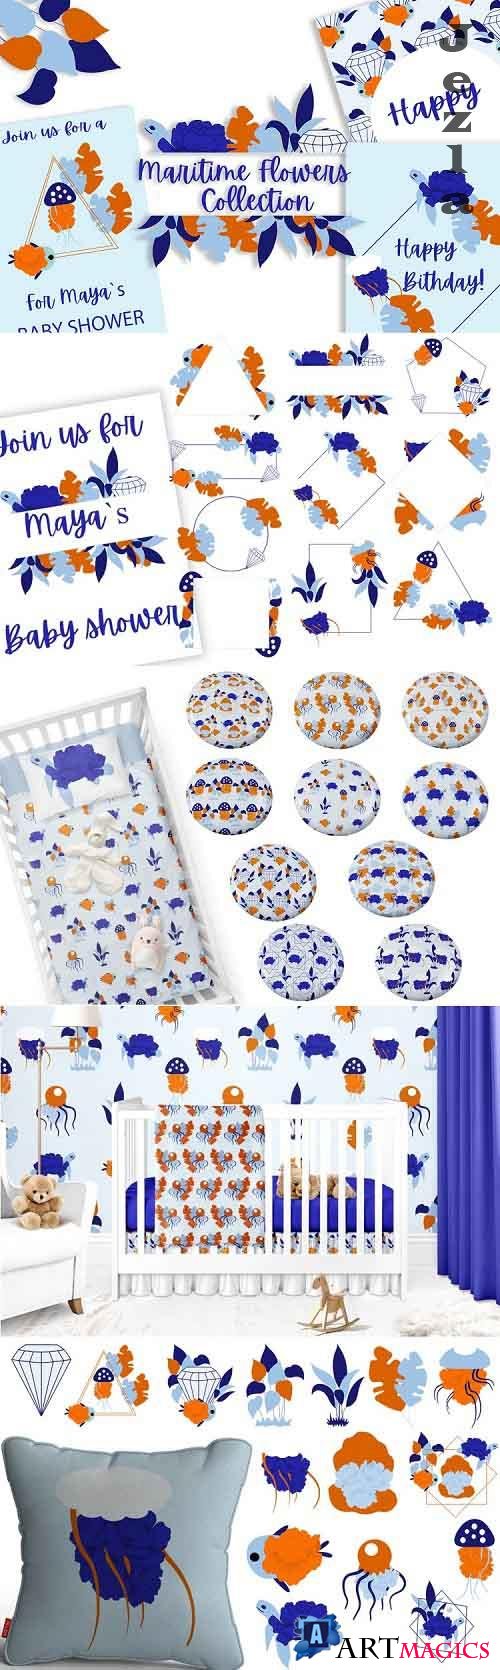 Nautical baby shower collection - 562040